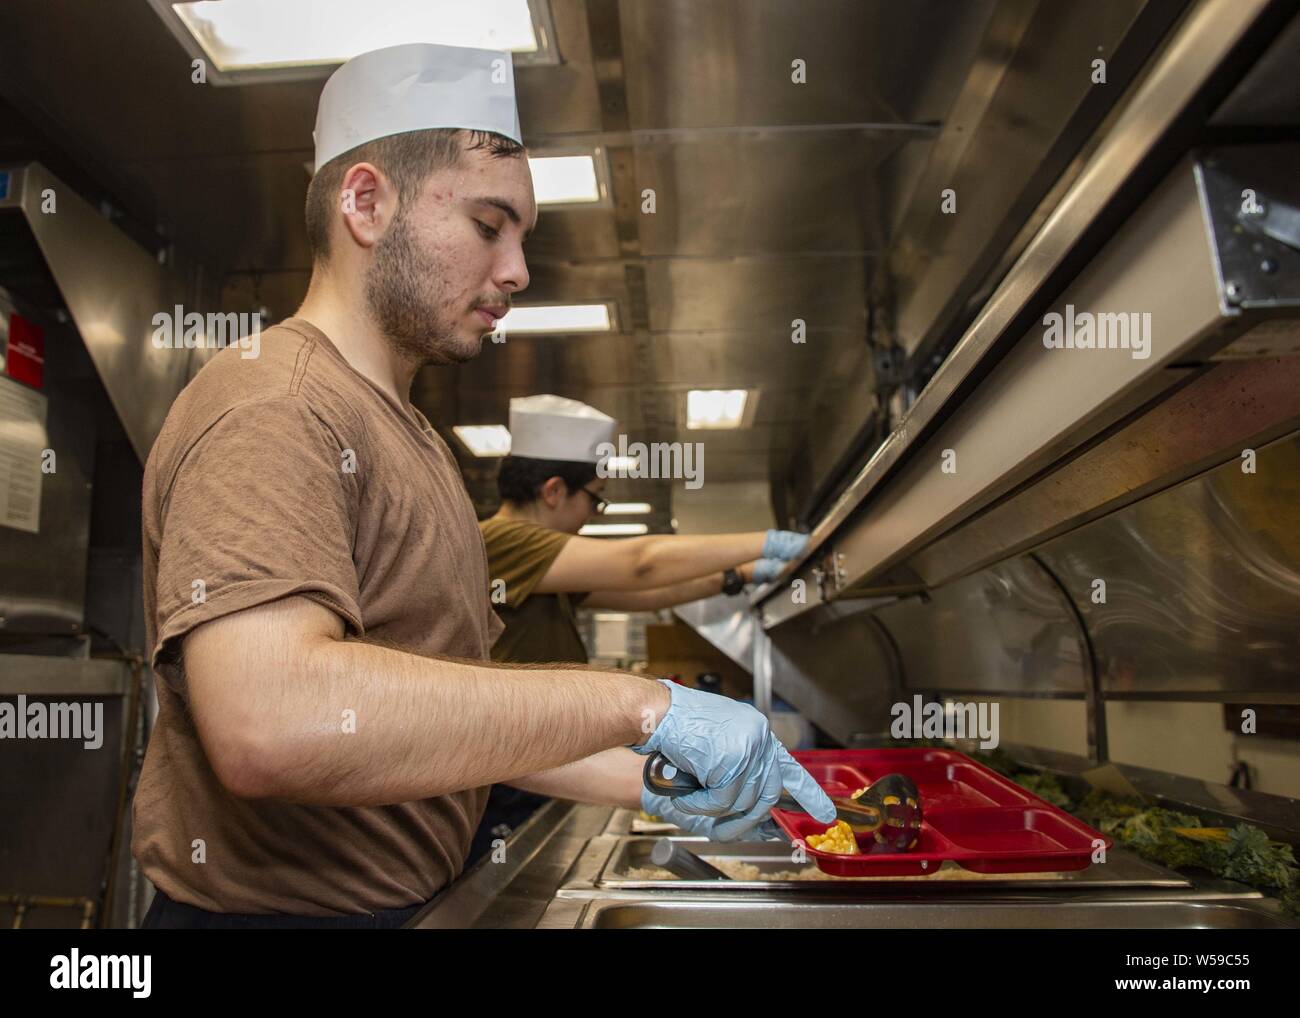 190725-N-KG461-1053  ARABIAN GULF (July 24, 2019) Operations Specialist 3rd Class Mario Cortez, from La Puente, Calif. assigned to amphibious assault ship USS Boxer (LHD 4), serves food to Sailors and Marines in the mess deck galley, July 25, 2019. Boxer is part of the Boxer Amphibious Ready Group and 11th Marine Expeditionary Unit and is deployed to the U.S. 5th Fleet area of operations in support of naval operations to ensure maritime stability and security in the Central Region, connecting the Mediterranean and the Pacific through the Western Indian Ocean and three strategic choke points. ( Stock Photo